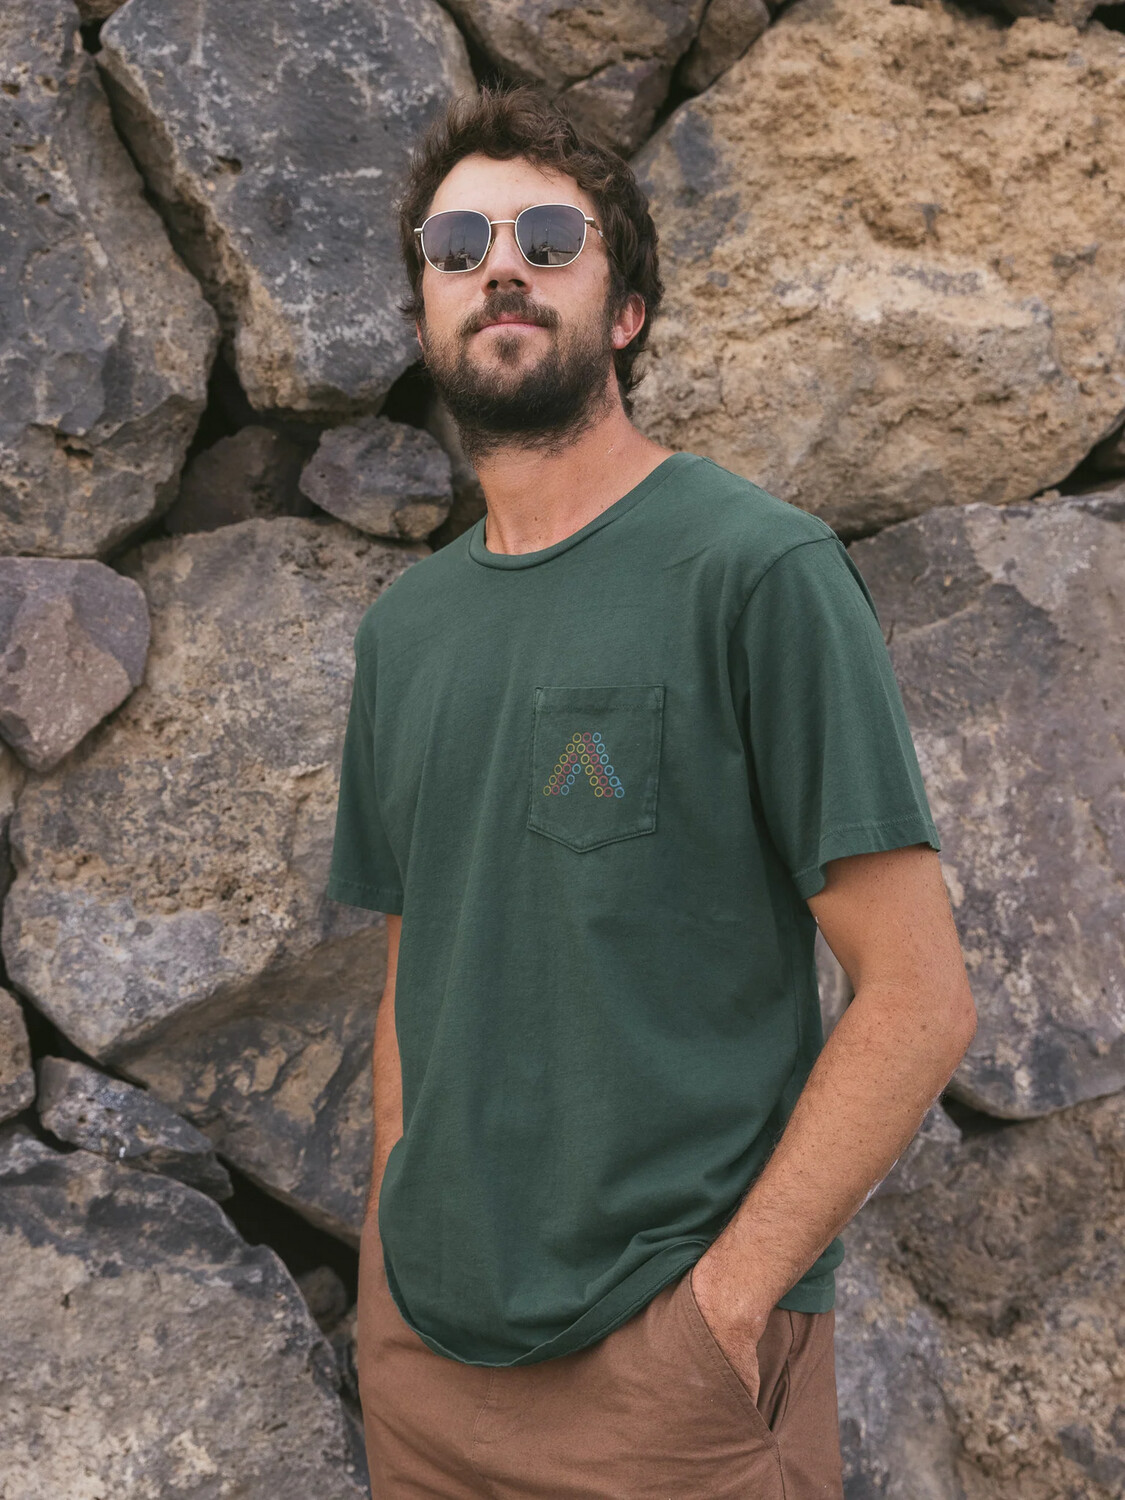 Lattice Energy Tee, Color: Rover Green, Size: M